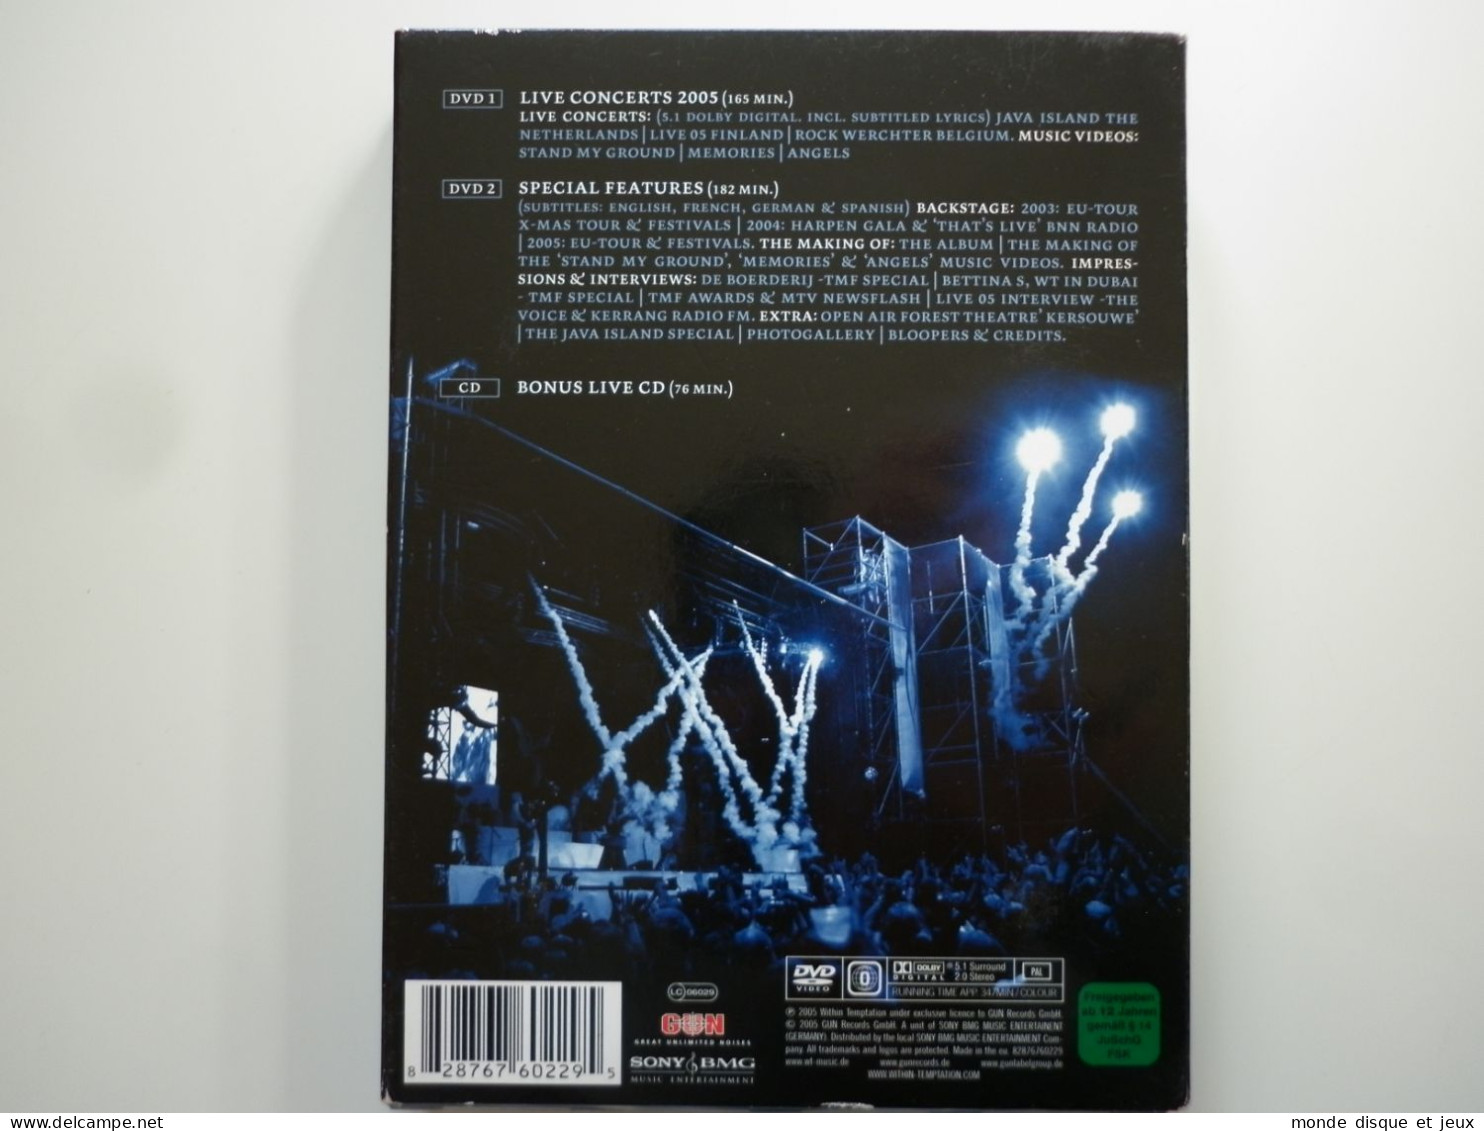 Within Temptation Double Dvd + 1 Cd Deluxe Edition The Silent Force Tour - Muziek DVD's